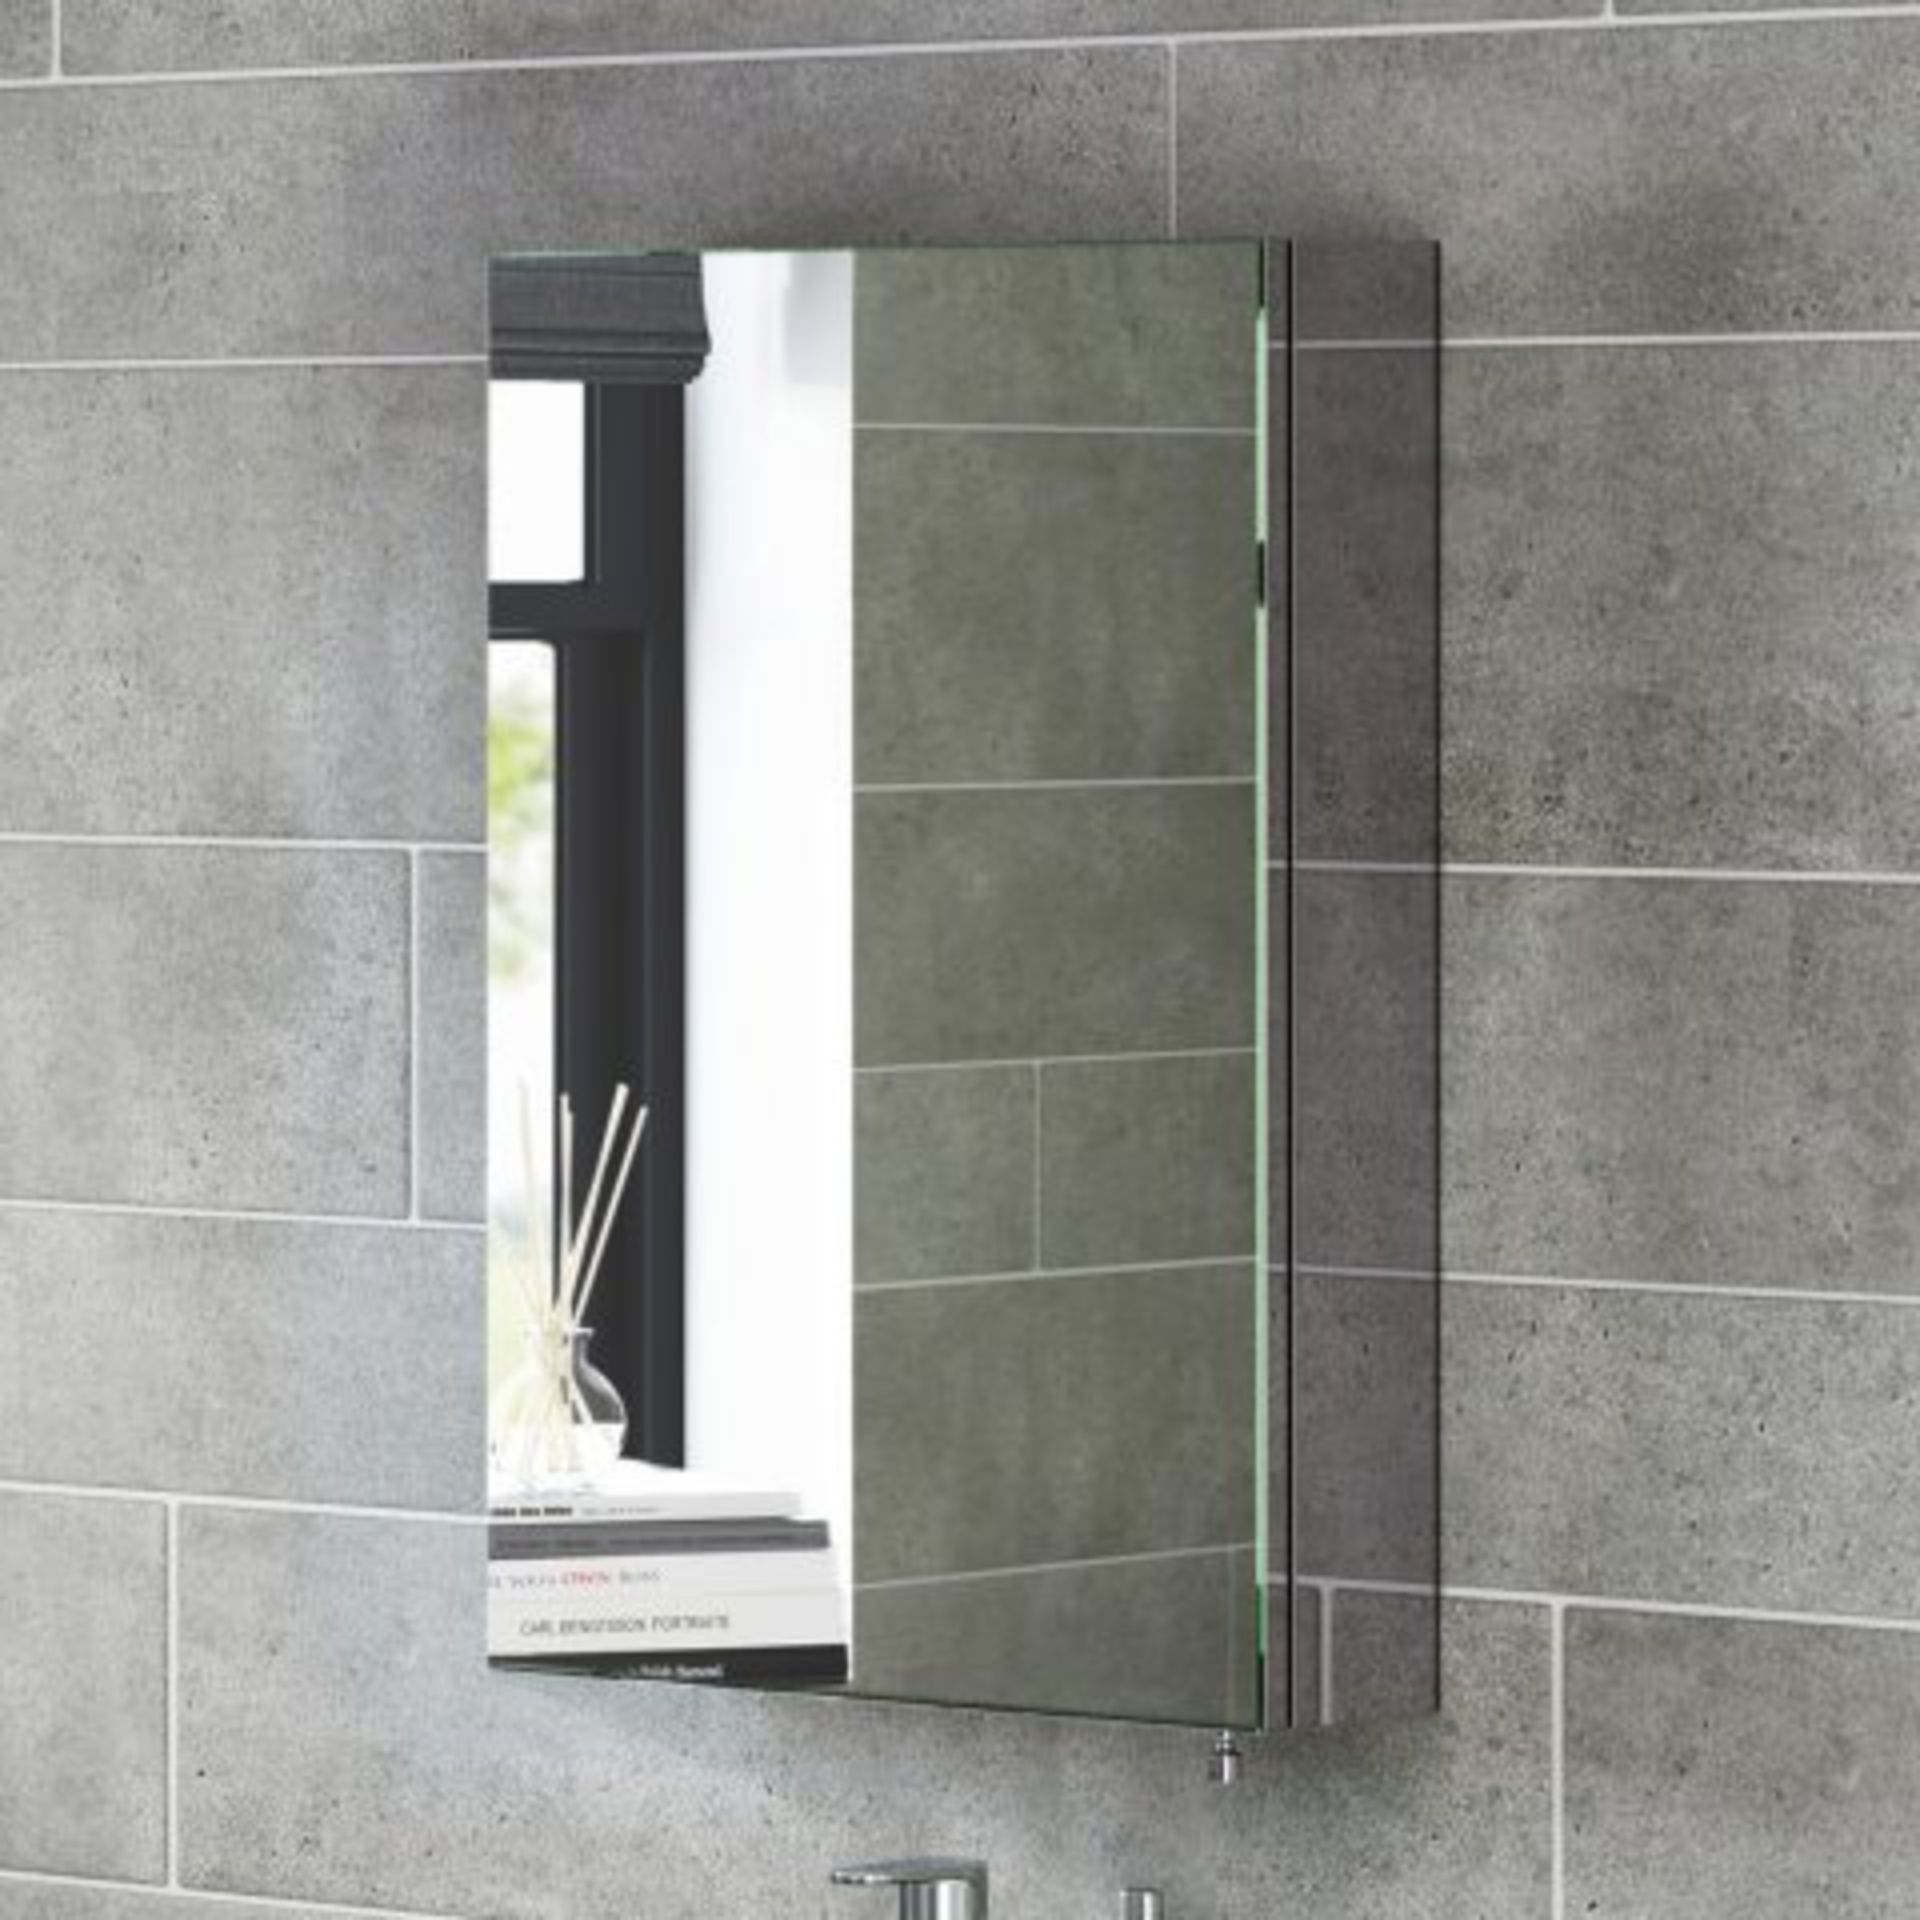 (P39) 600x400mm Liberty Stainless Steel Single Door Mirror Cabinet RRP £299.99. Perfect Reflection